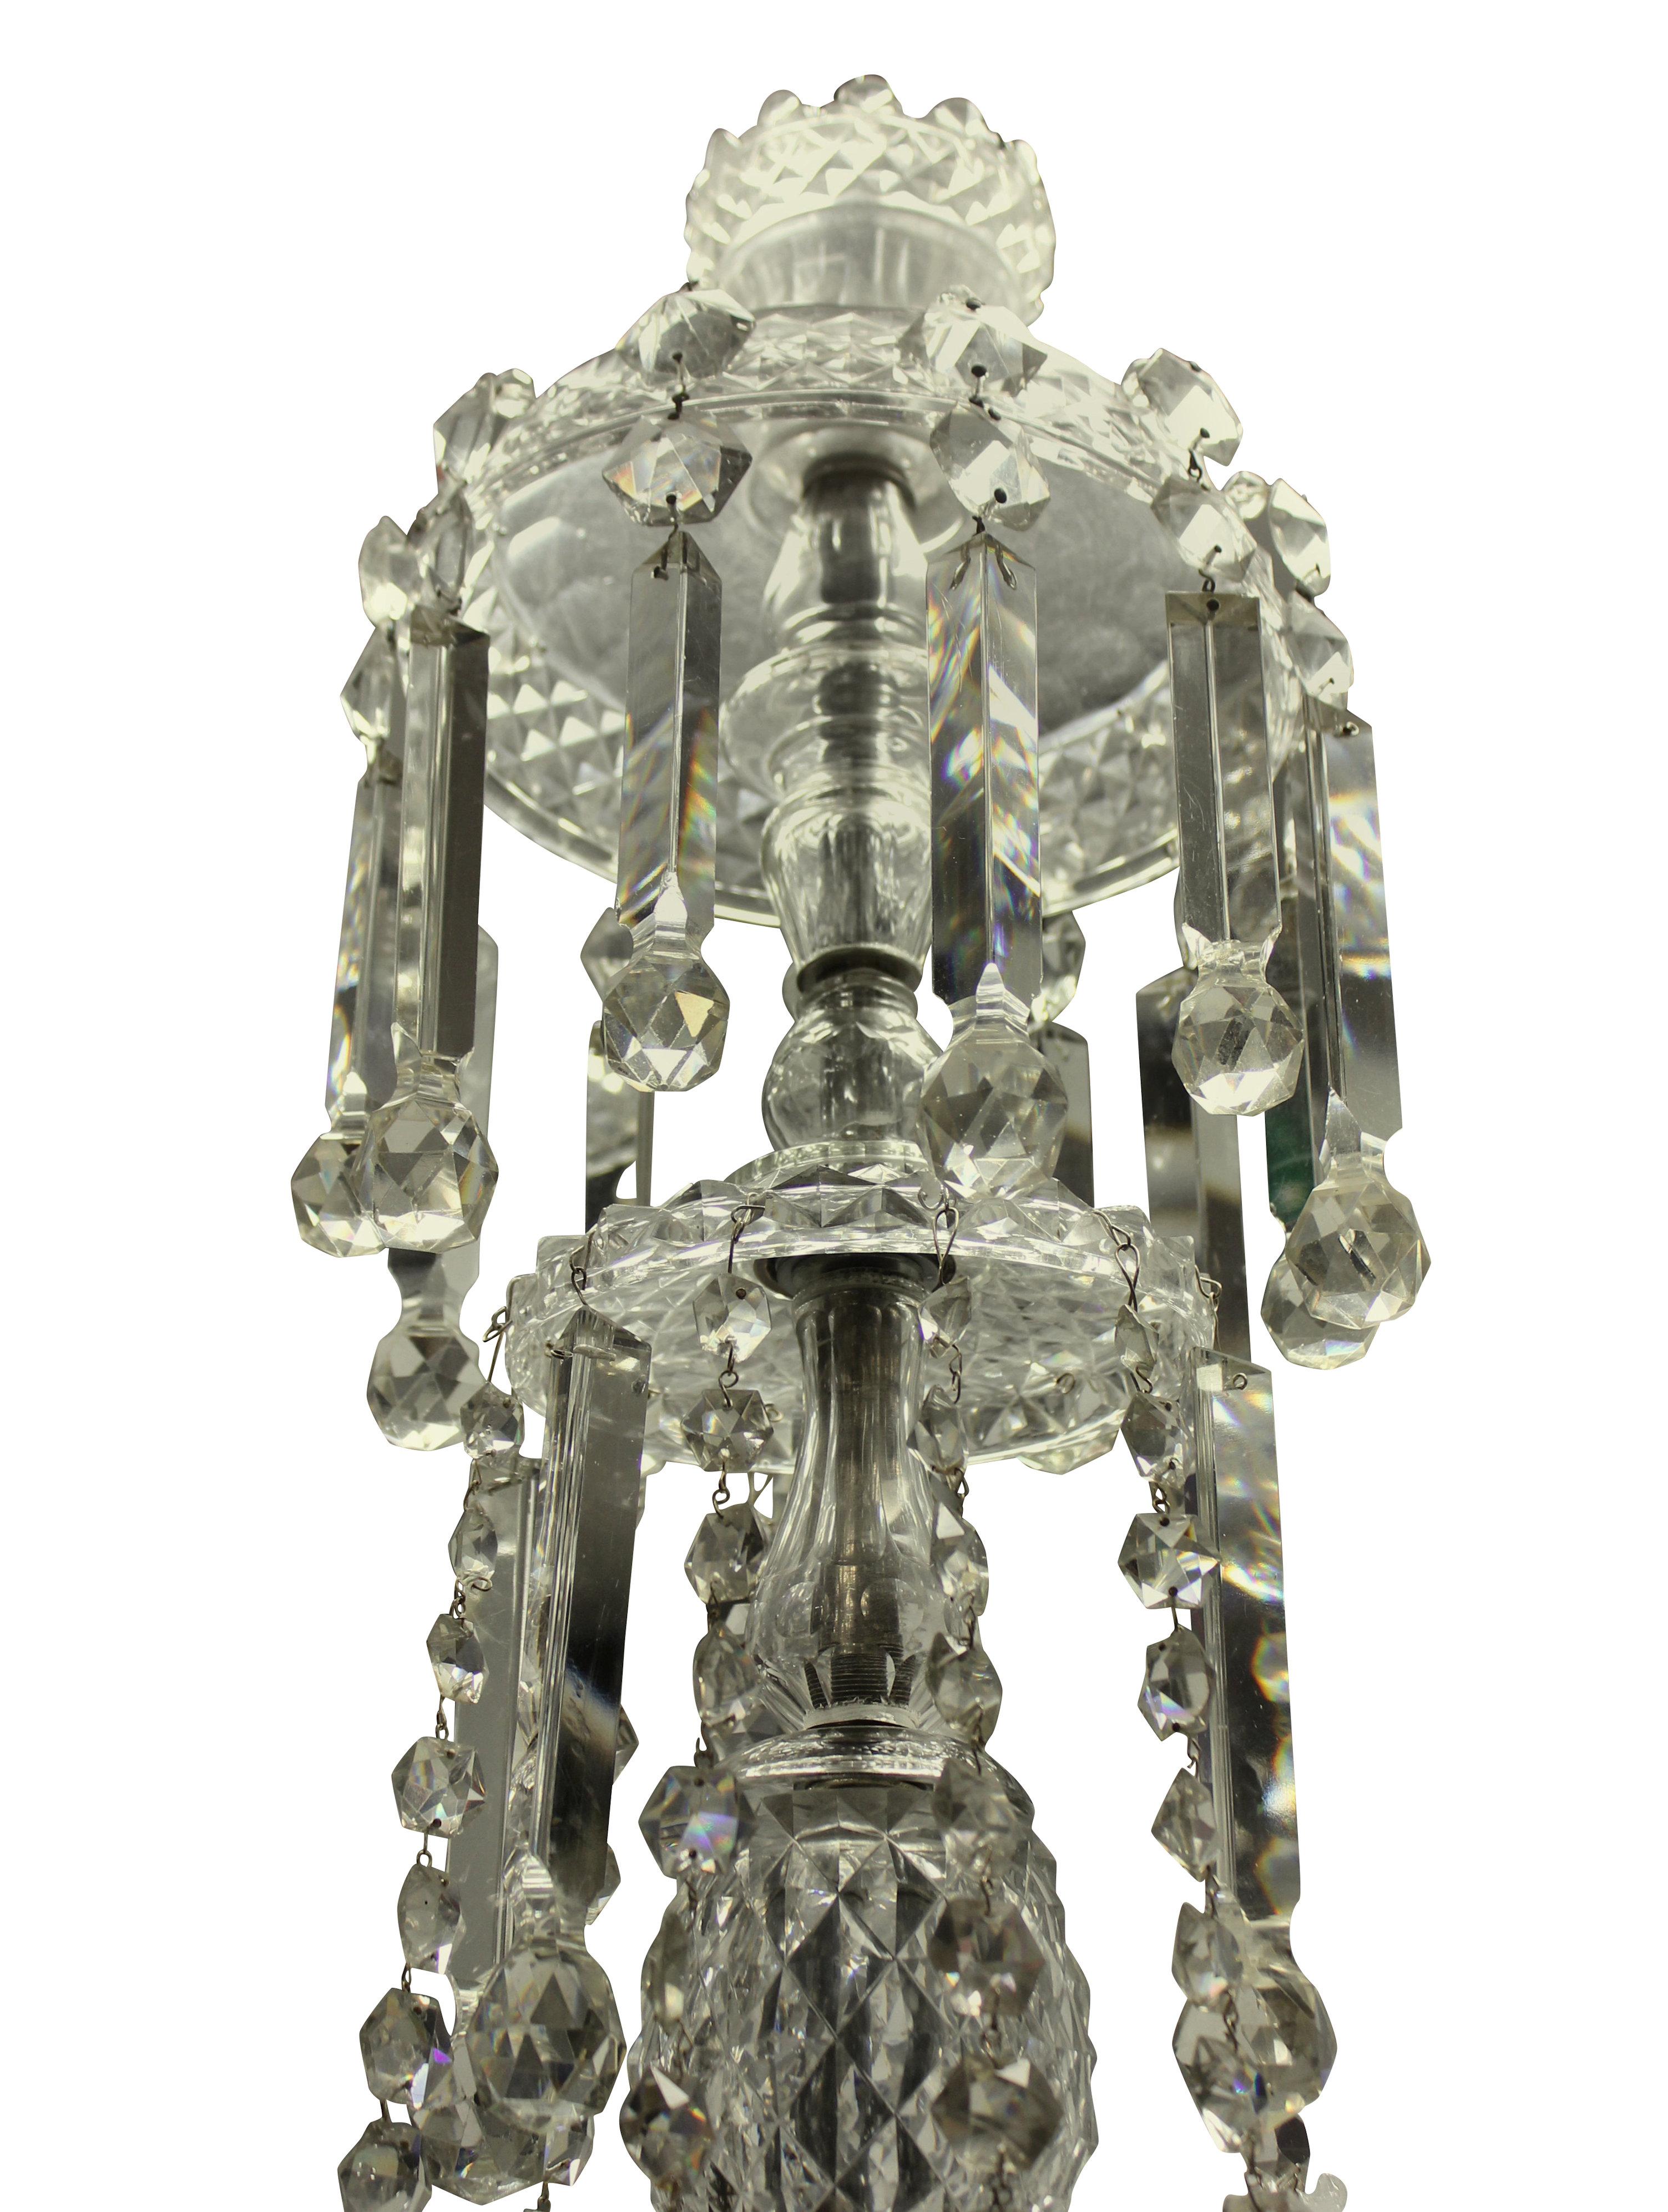 A large English cut glass chandelier of fine quality, comprising eight lower and eight upper arms. The chandelier is profusely hand cut throughout in the pineapple design and hung with pendants, swags and decorations.